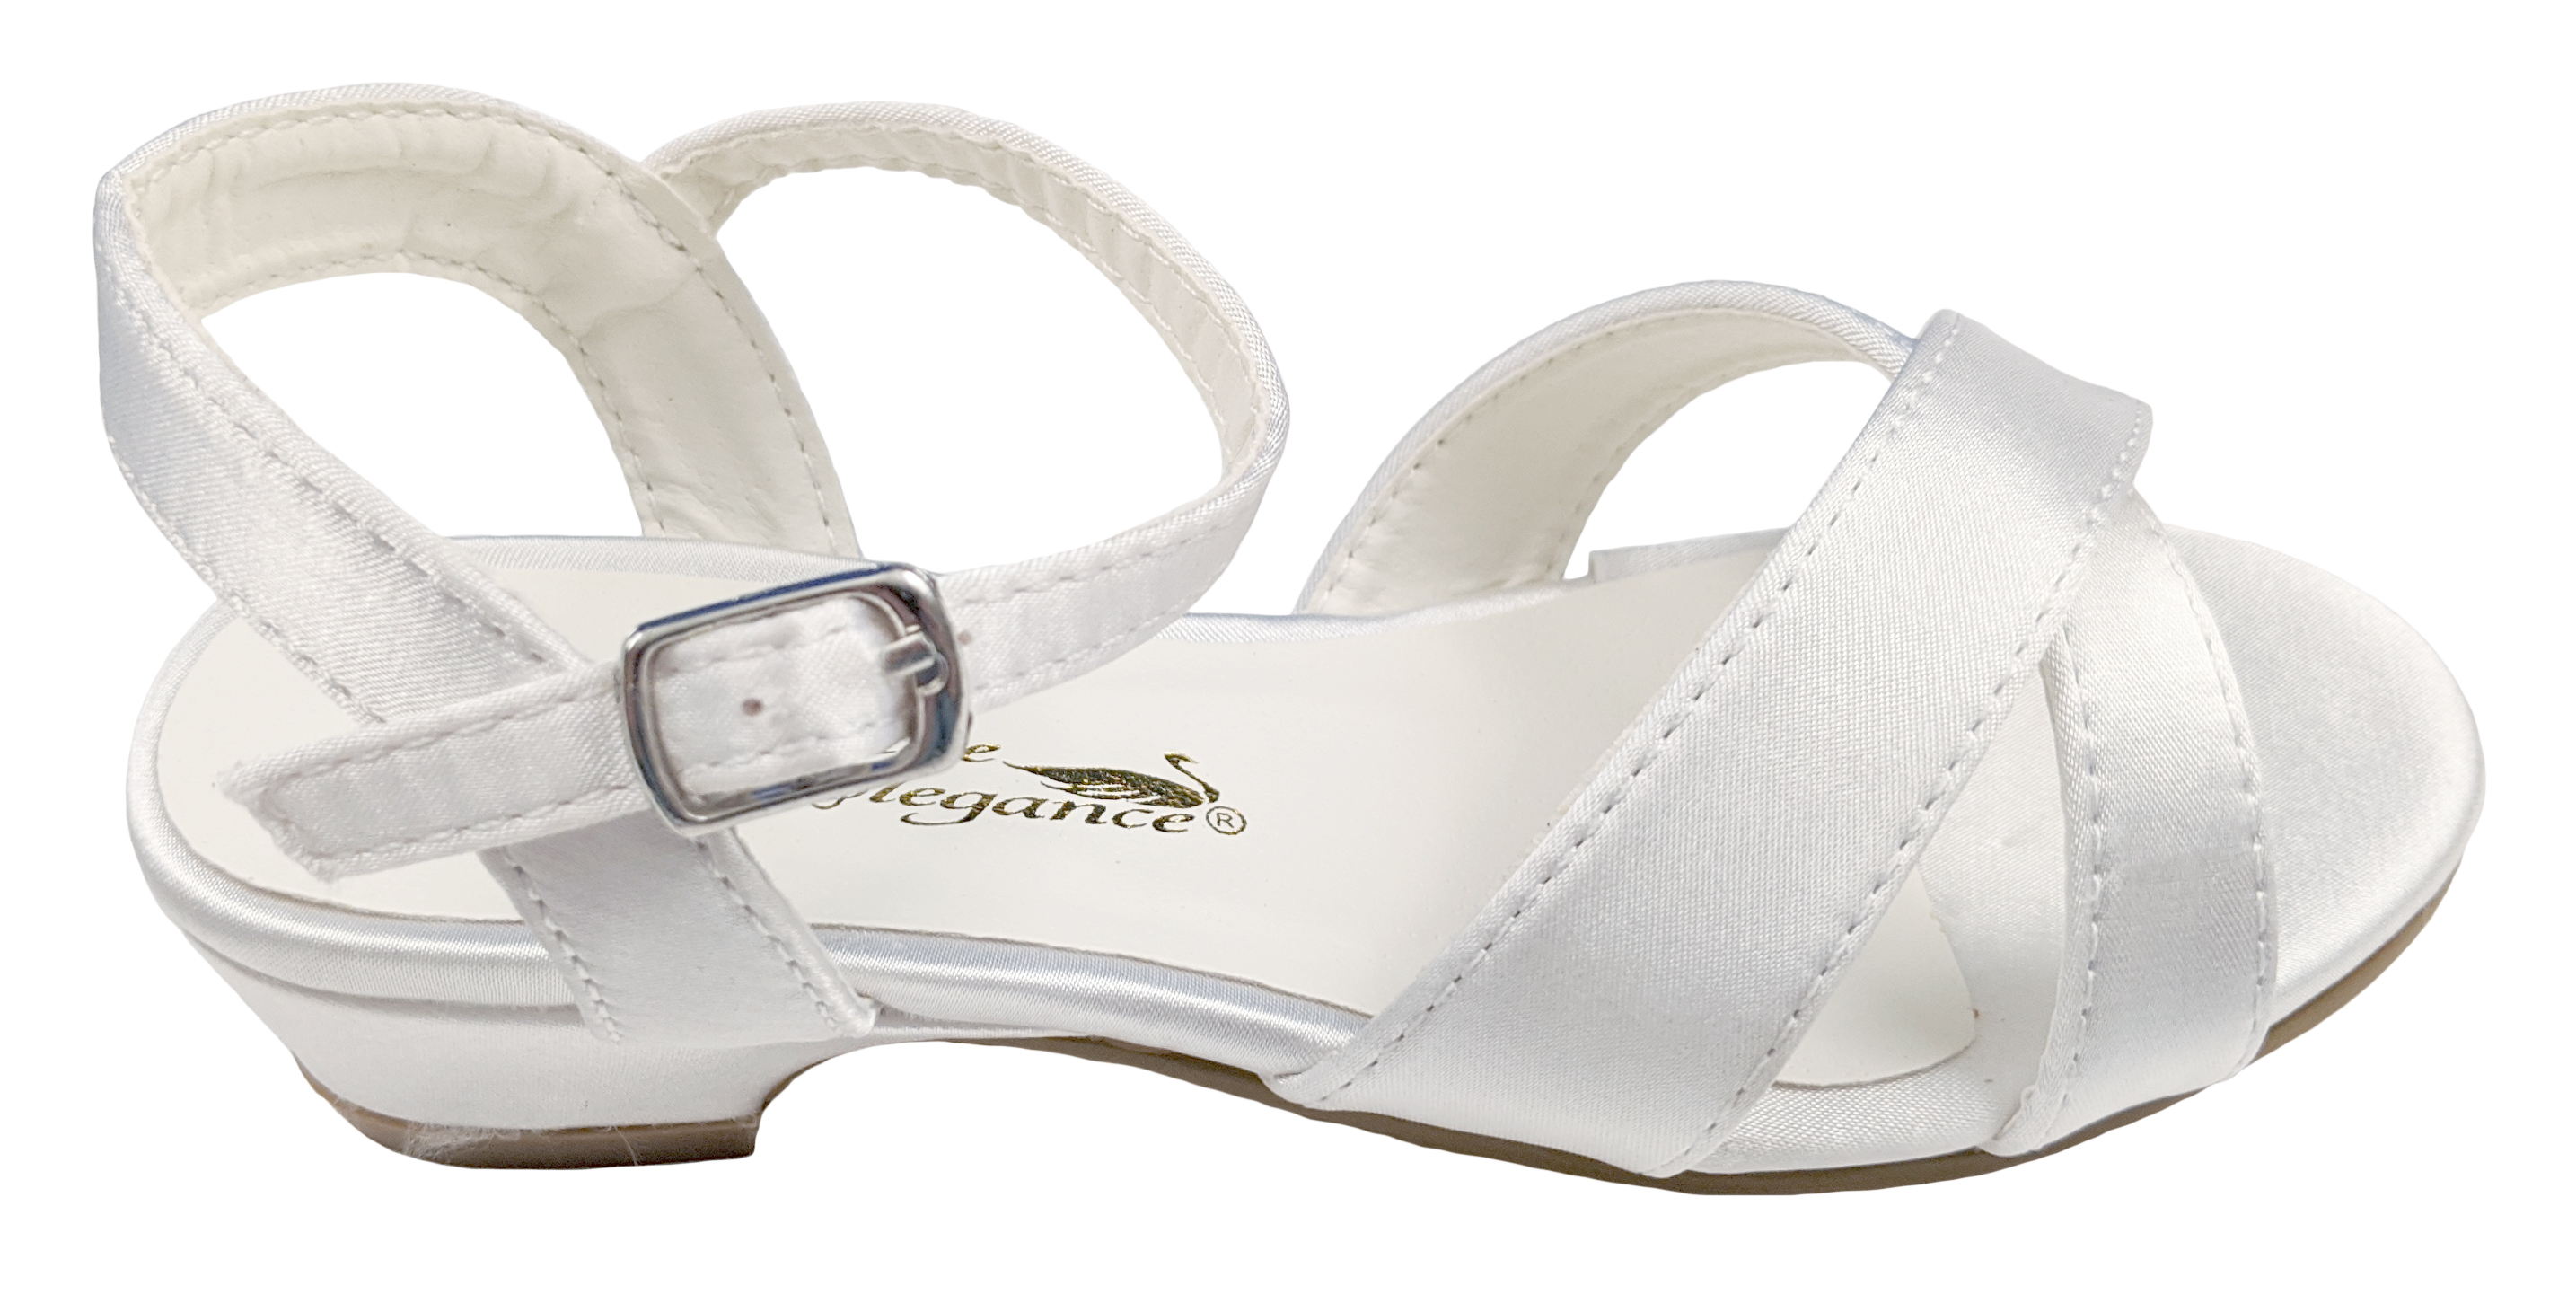 Little Things Mean A Lot Girls White Satin Dress Sandals with Heel (Little Girl, Big Girl) - image 3 of 6